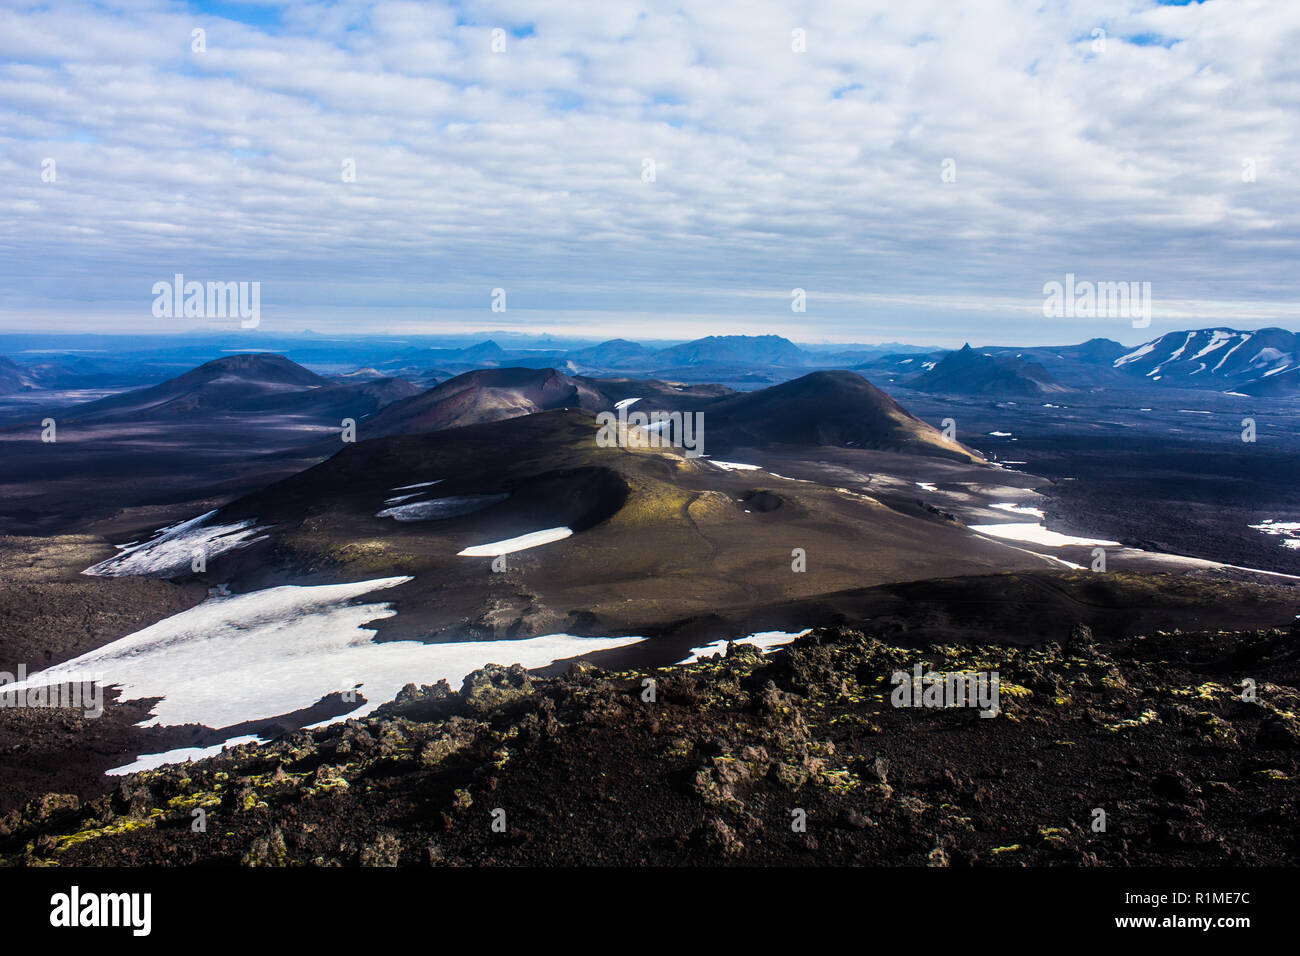 View from Mt Hekla, active volcano in Iceland Stock Photo